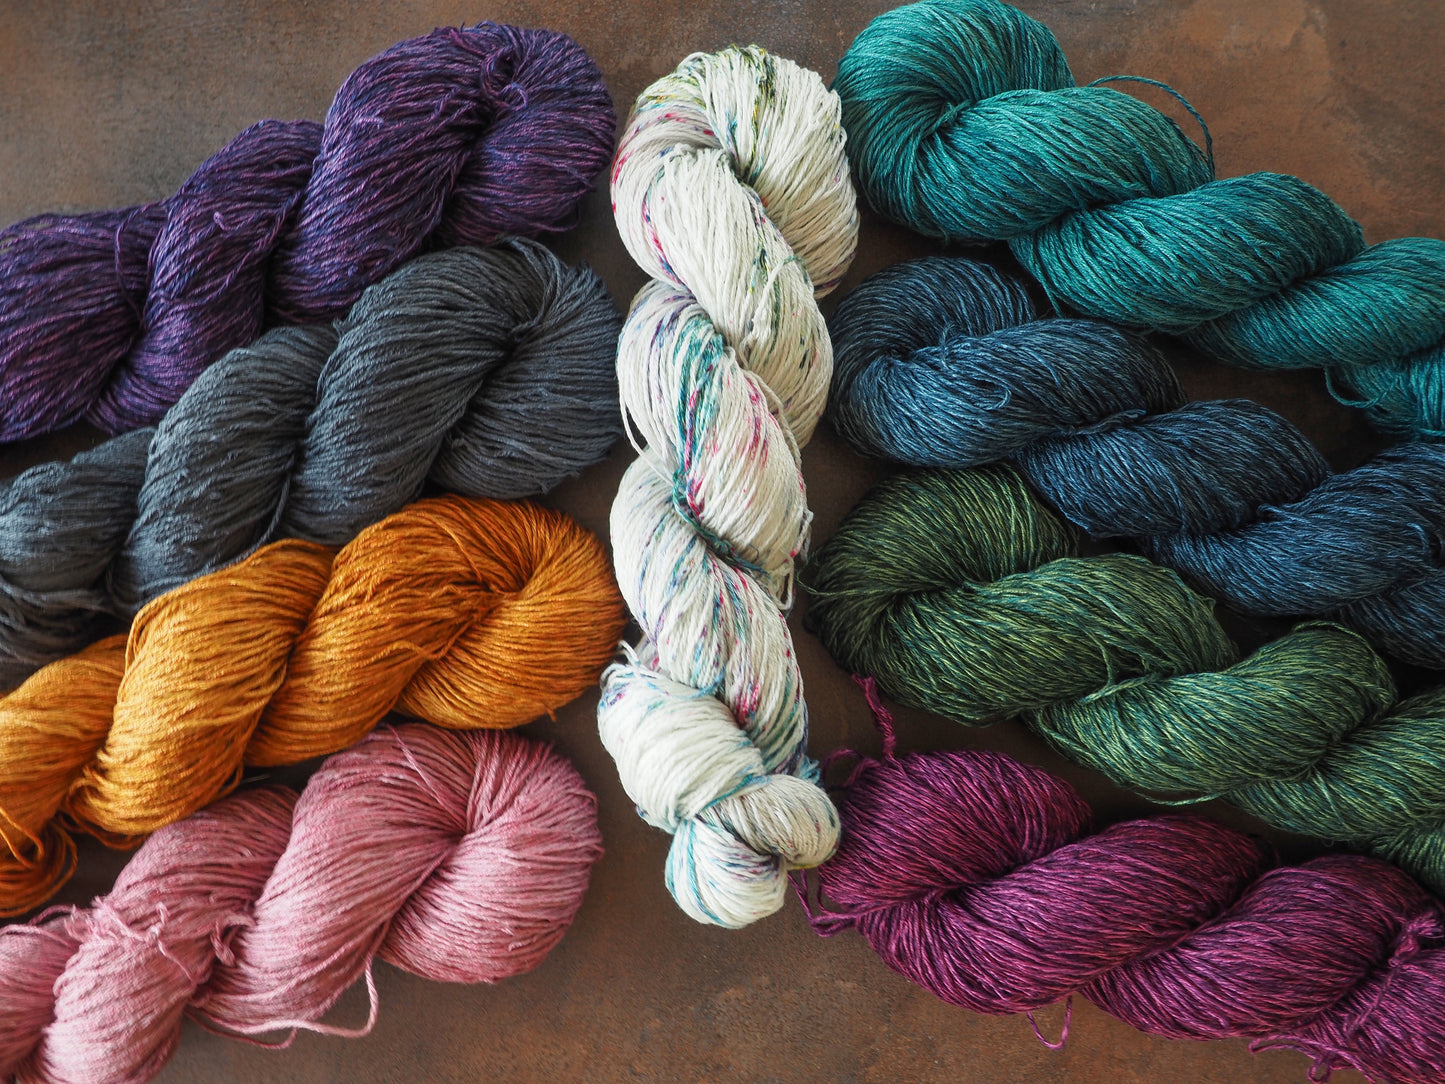 Dark & Stormy Full Set - dyed to order please allow 2-3 weeks for dyeing